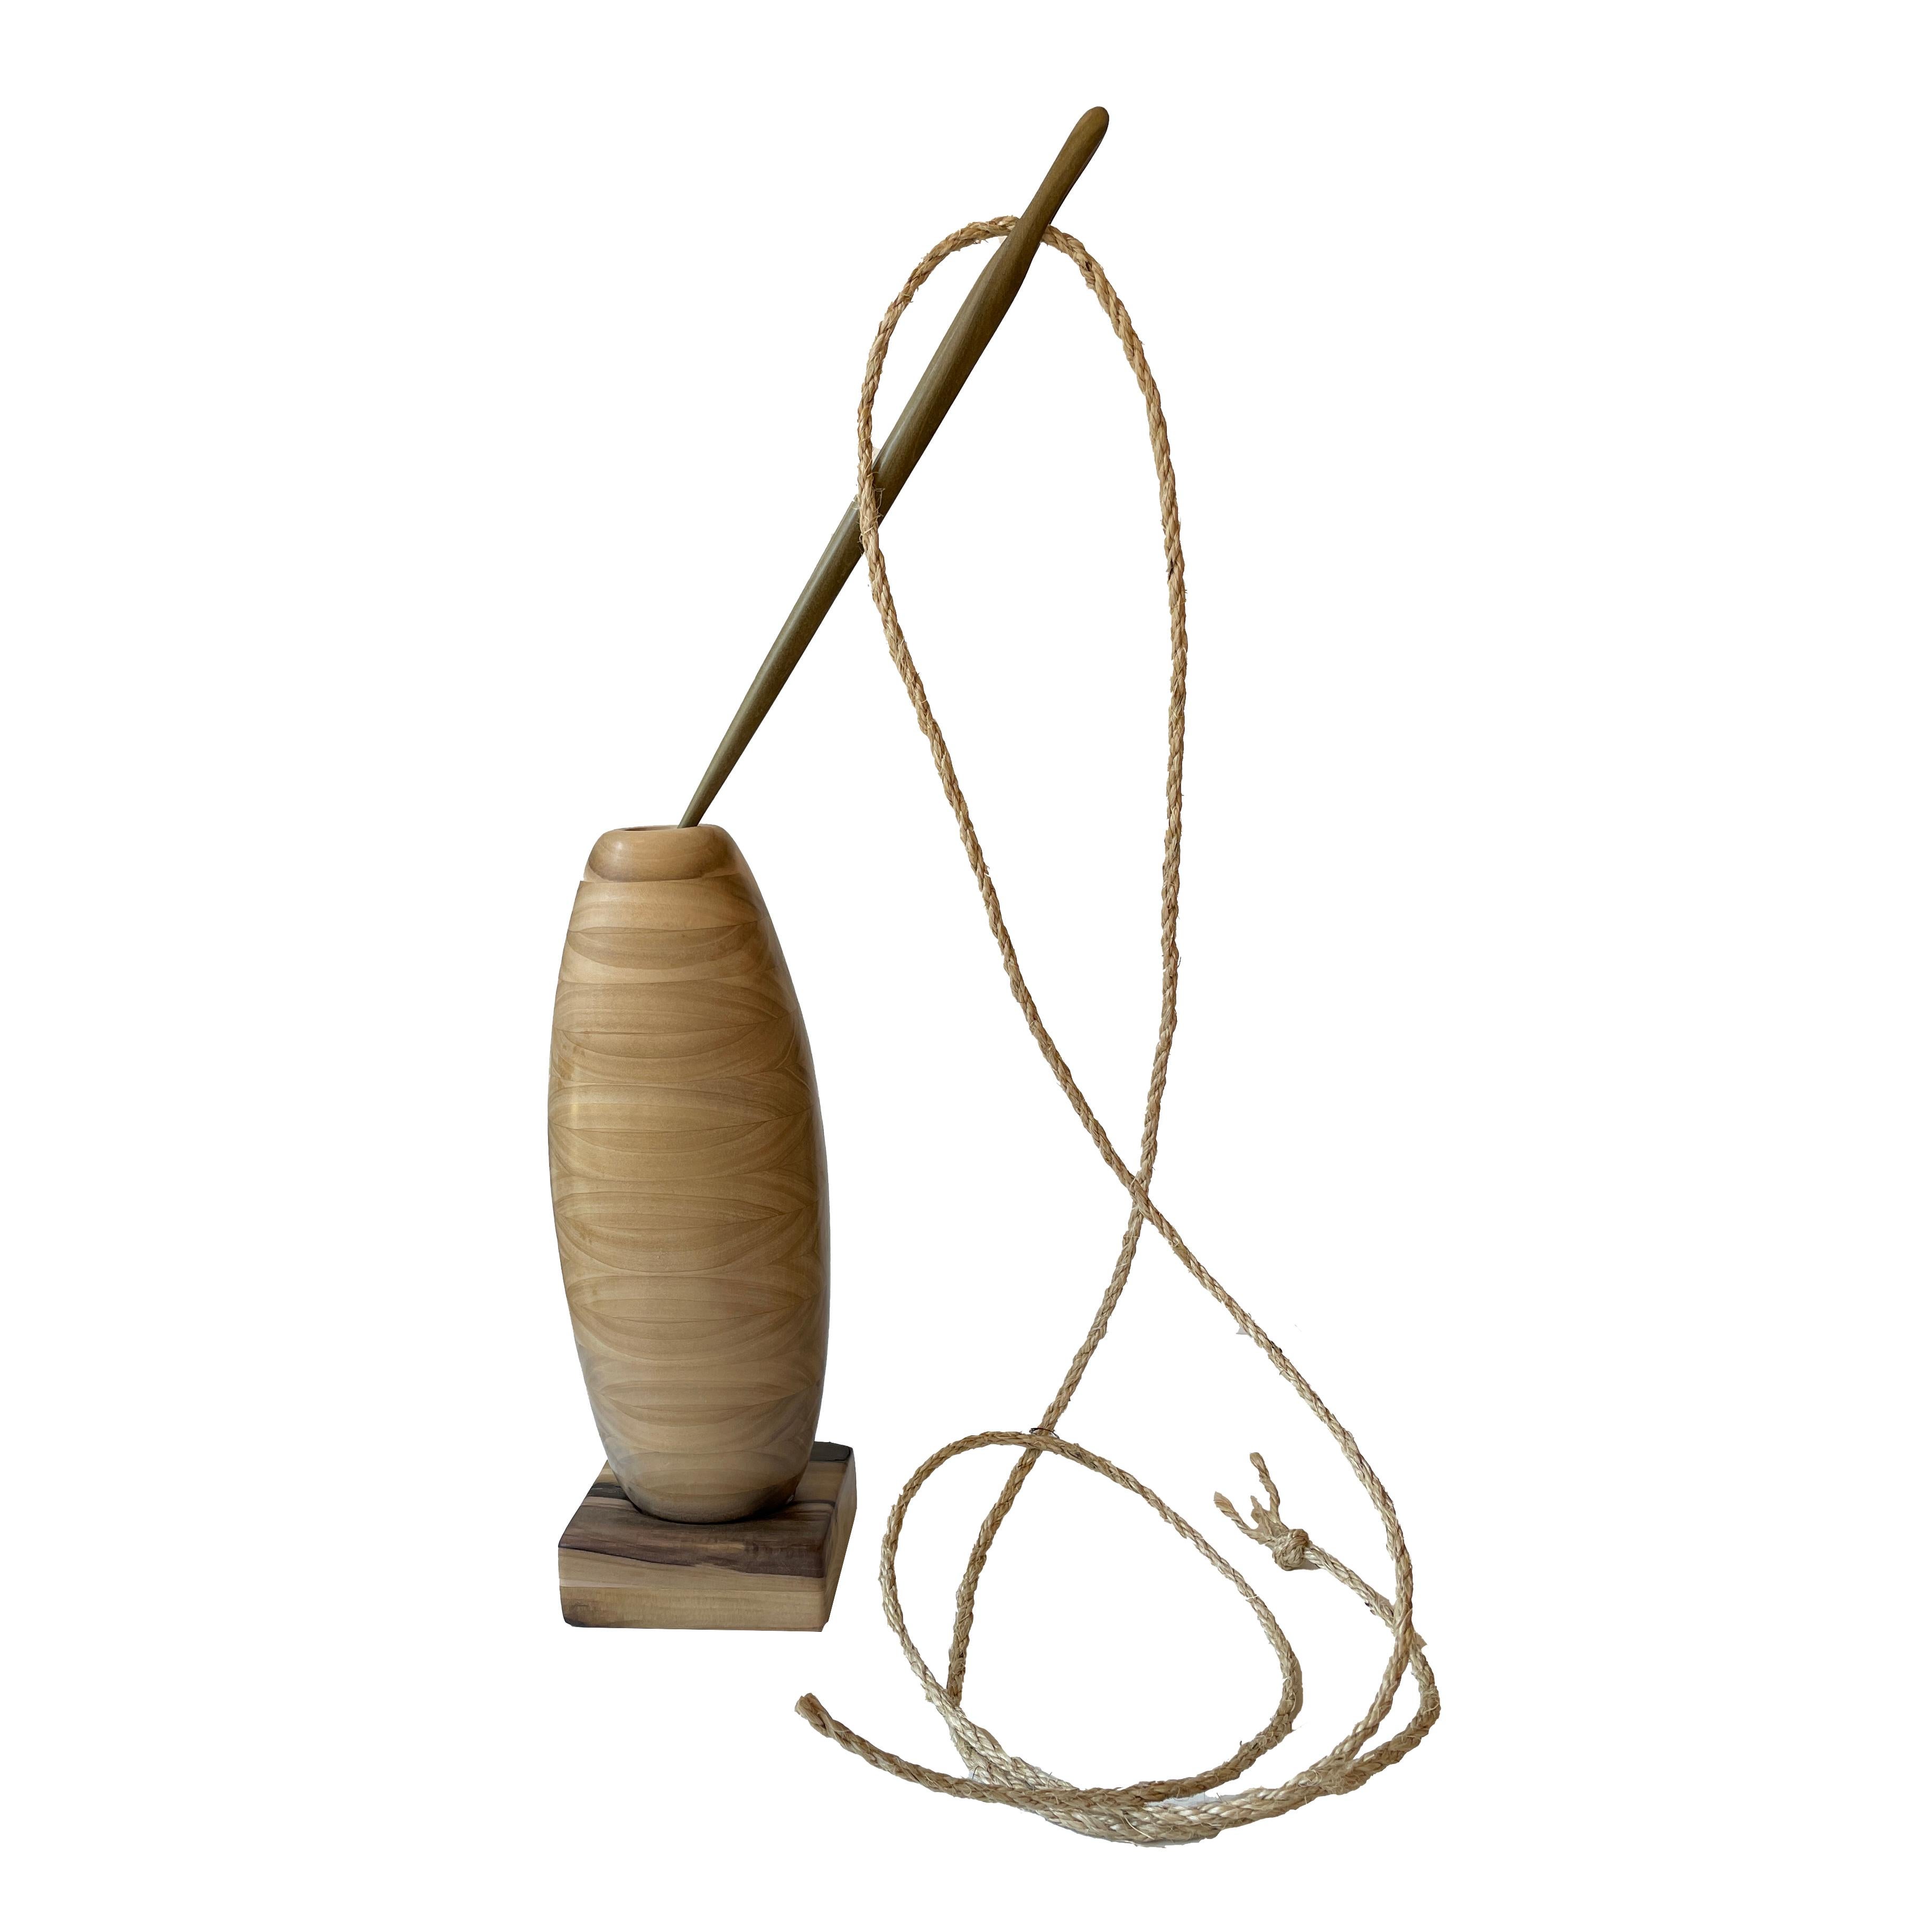 Mark Bowers Abstract Sculpture - Sewn Dialog, Poplar Wood Sculpture, Vessel with Wooden Needle 